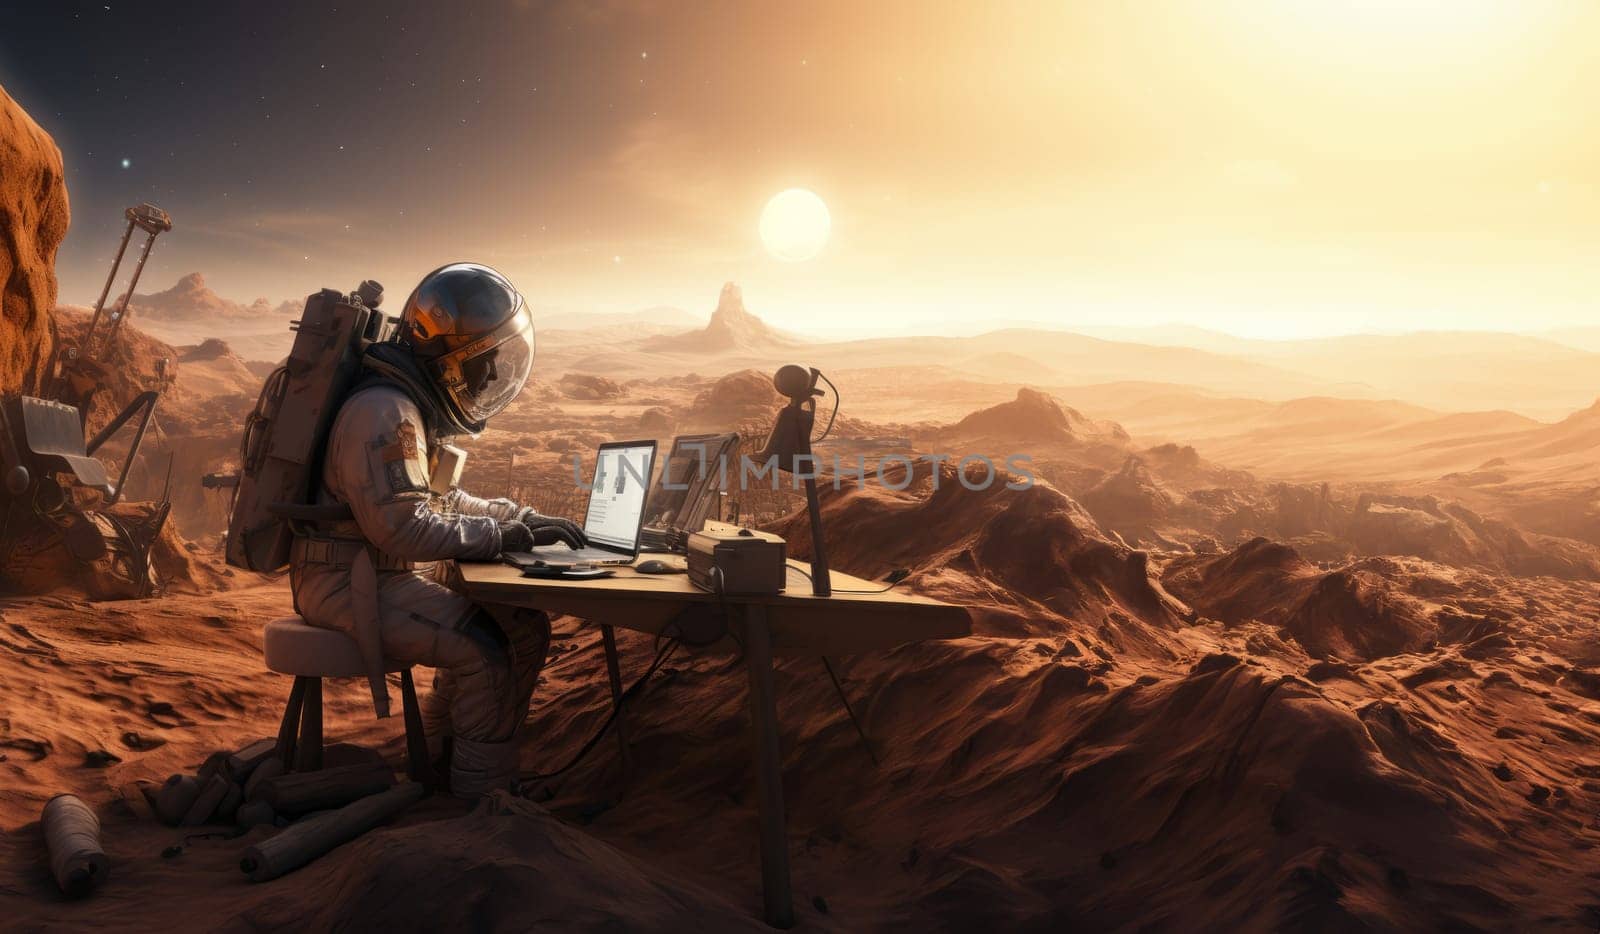 An astronaut on Mars utilizes a laptop during the enchanting sunset, blending the realms of technology and exploration on the red planet, symbolizing the cosmic connection between human innovation and the extraterrestrial landscape.Generated image by dotshock